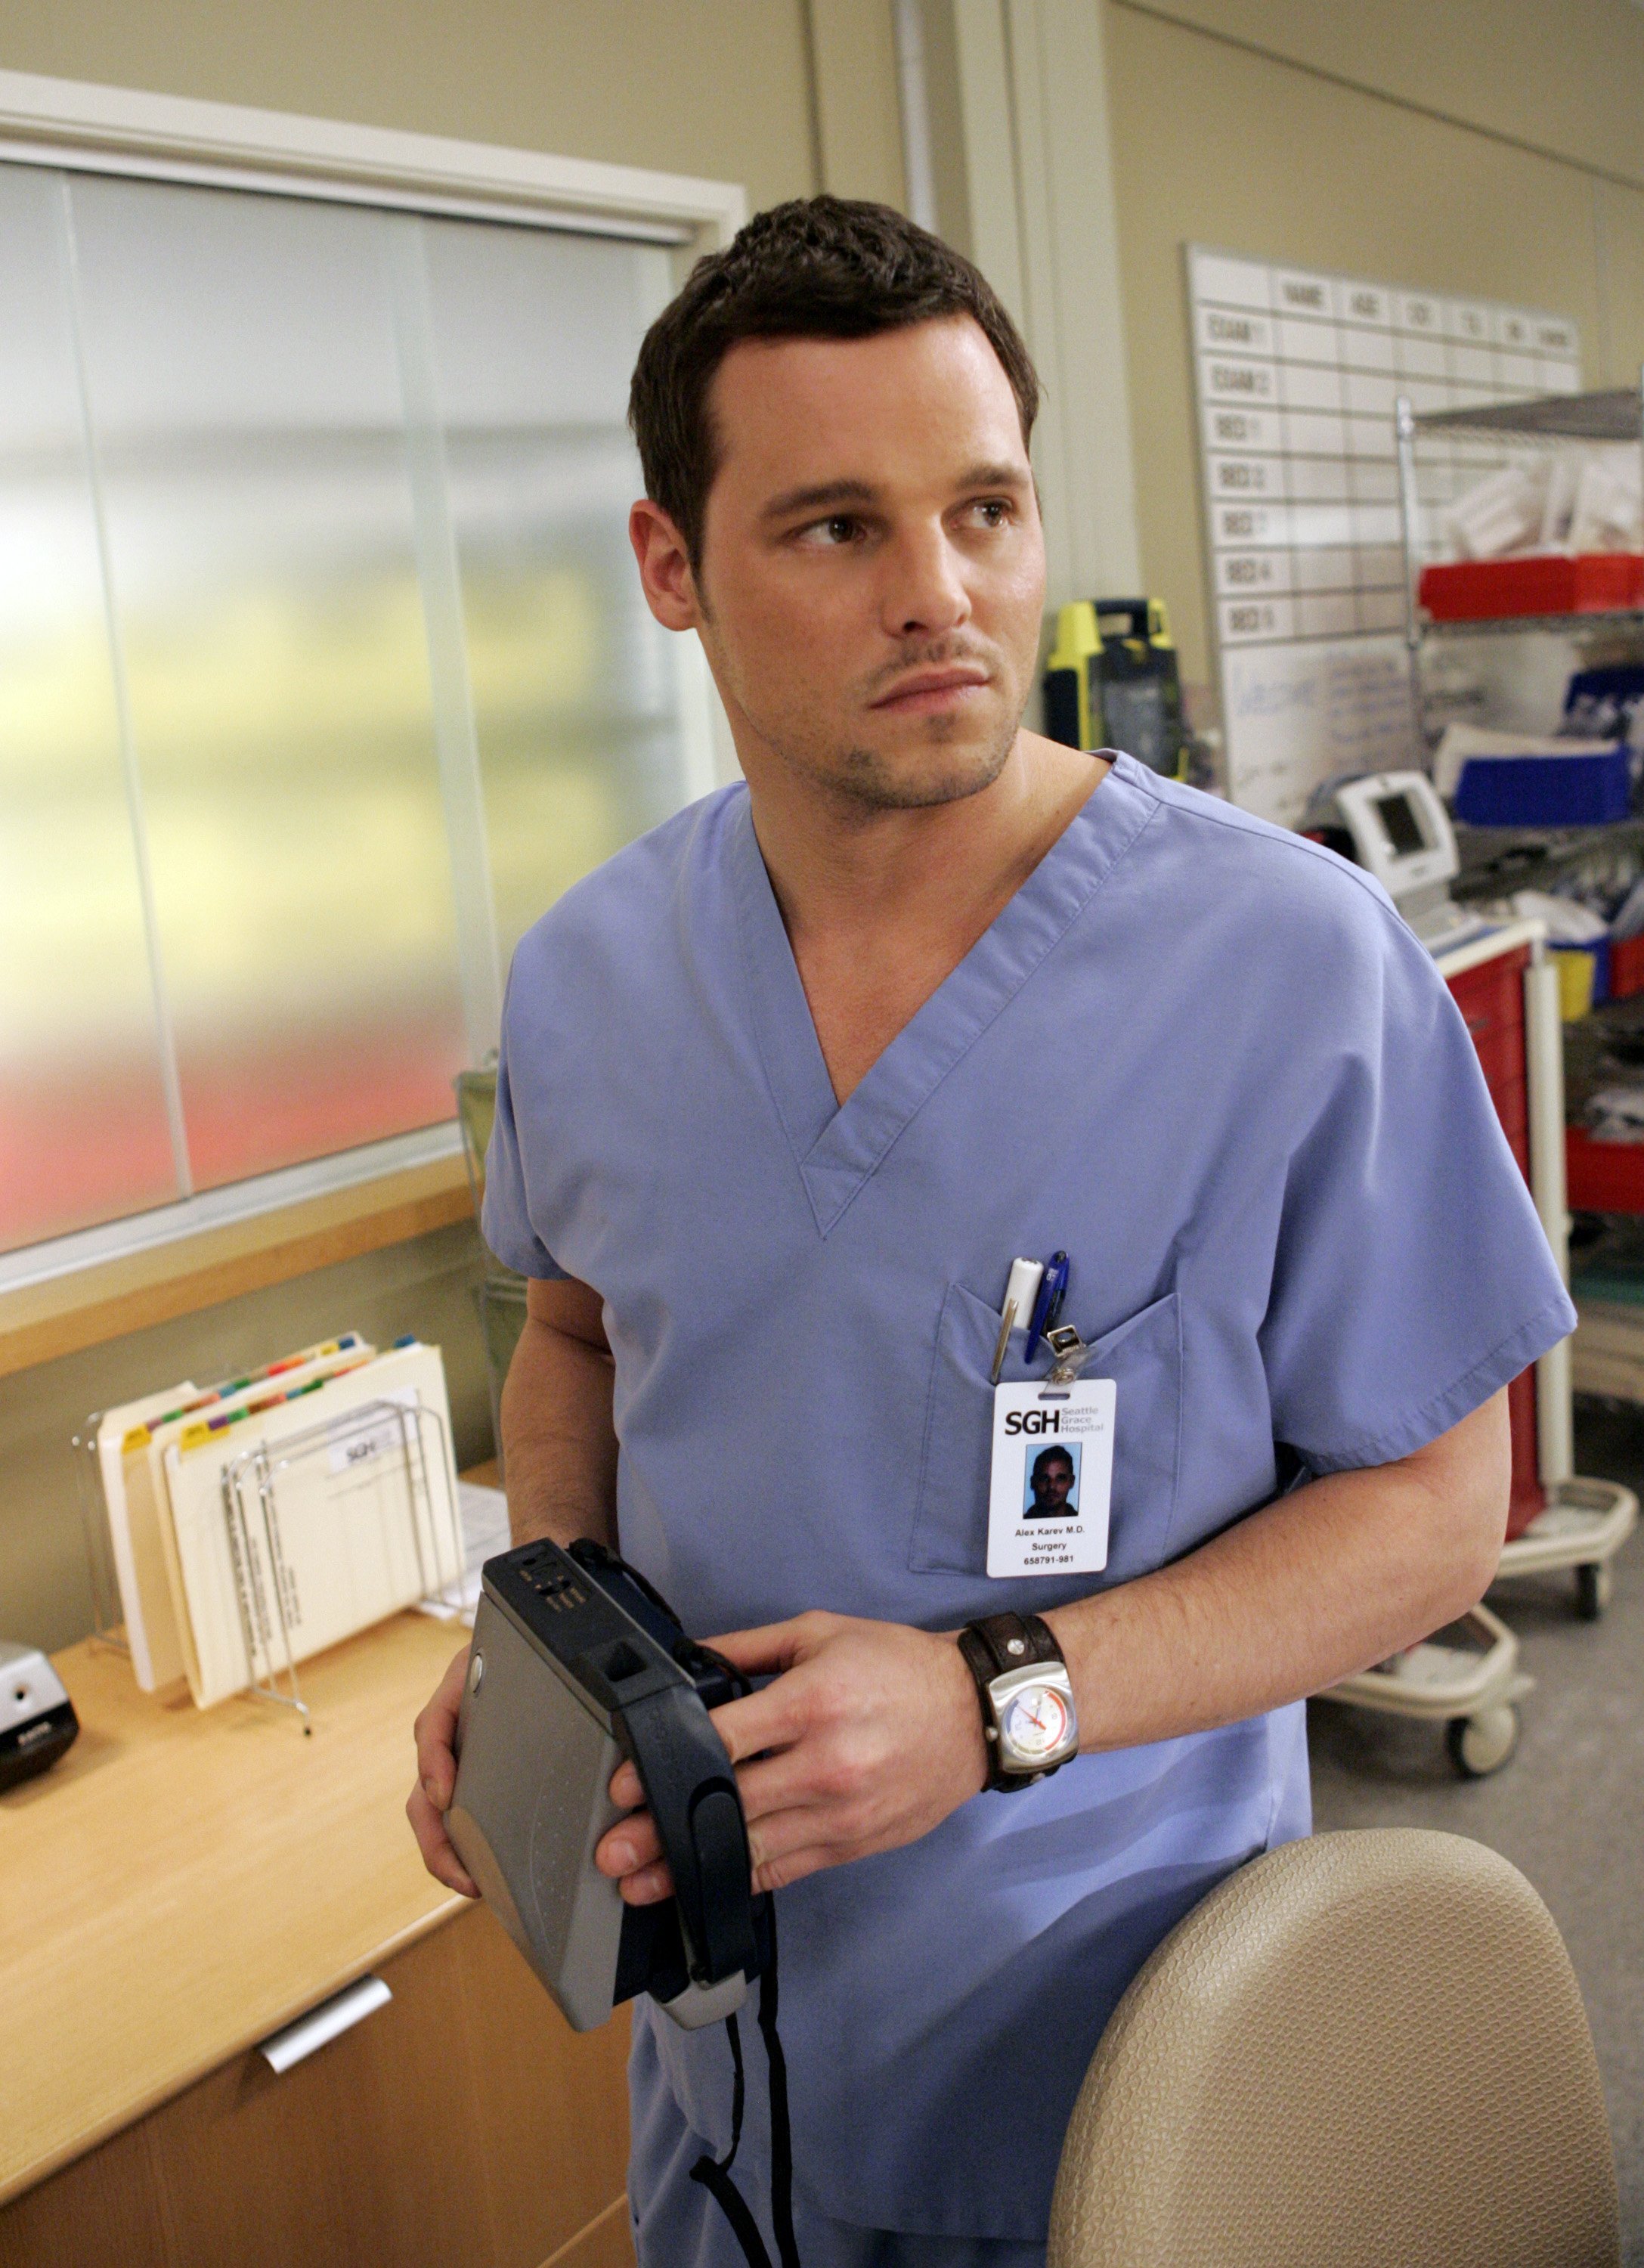 Justin Chambers in an episode of "Grey's Anatomy" on February 15, 2007. | Source: Getty Images.